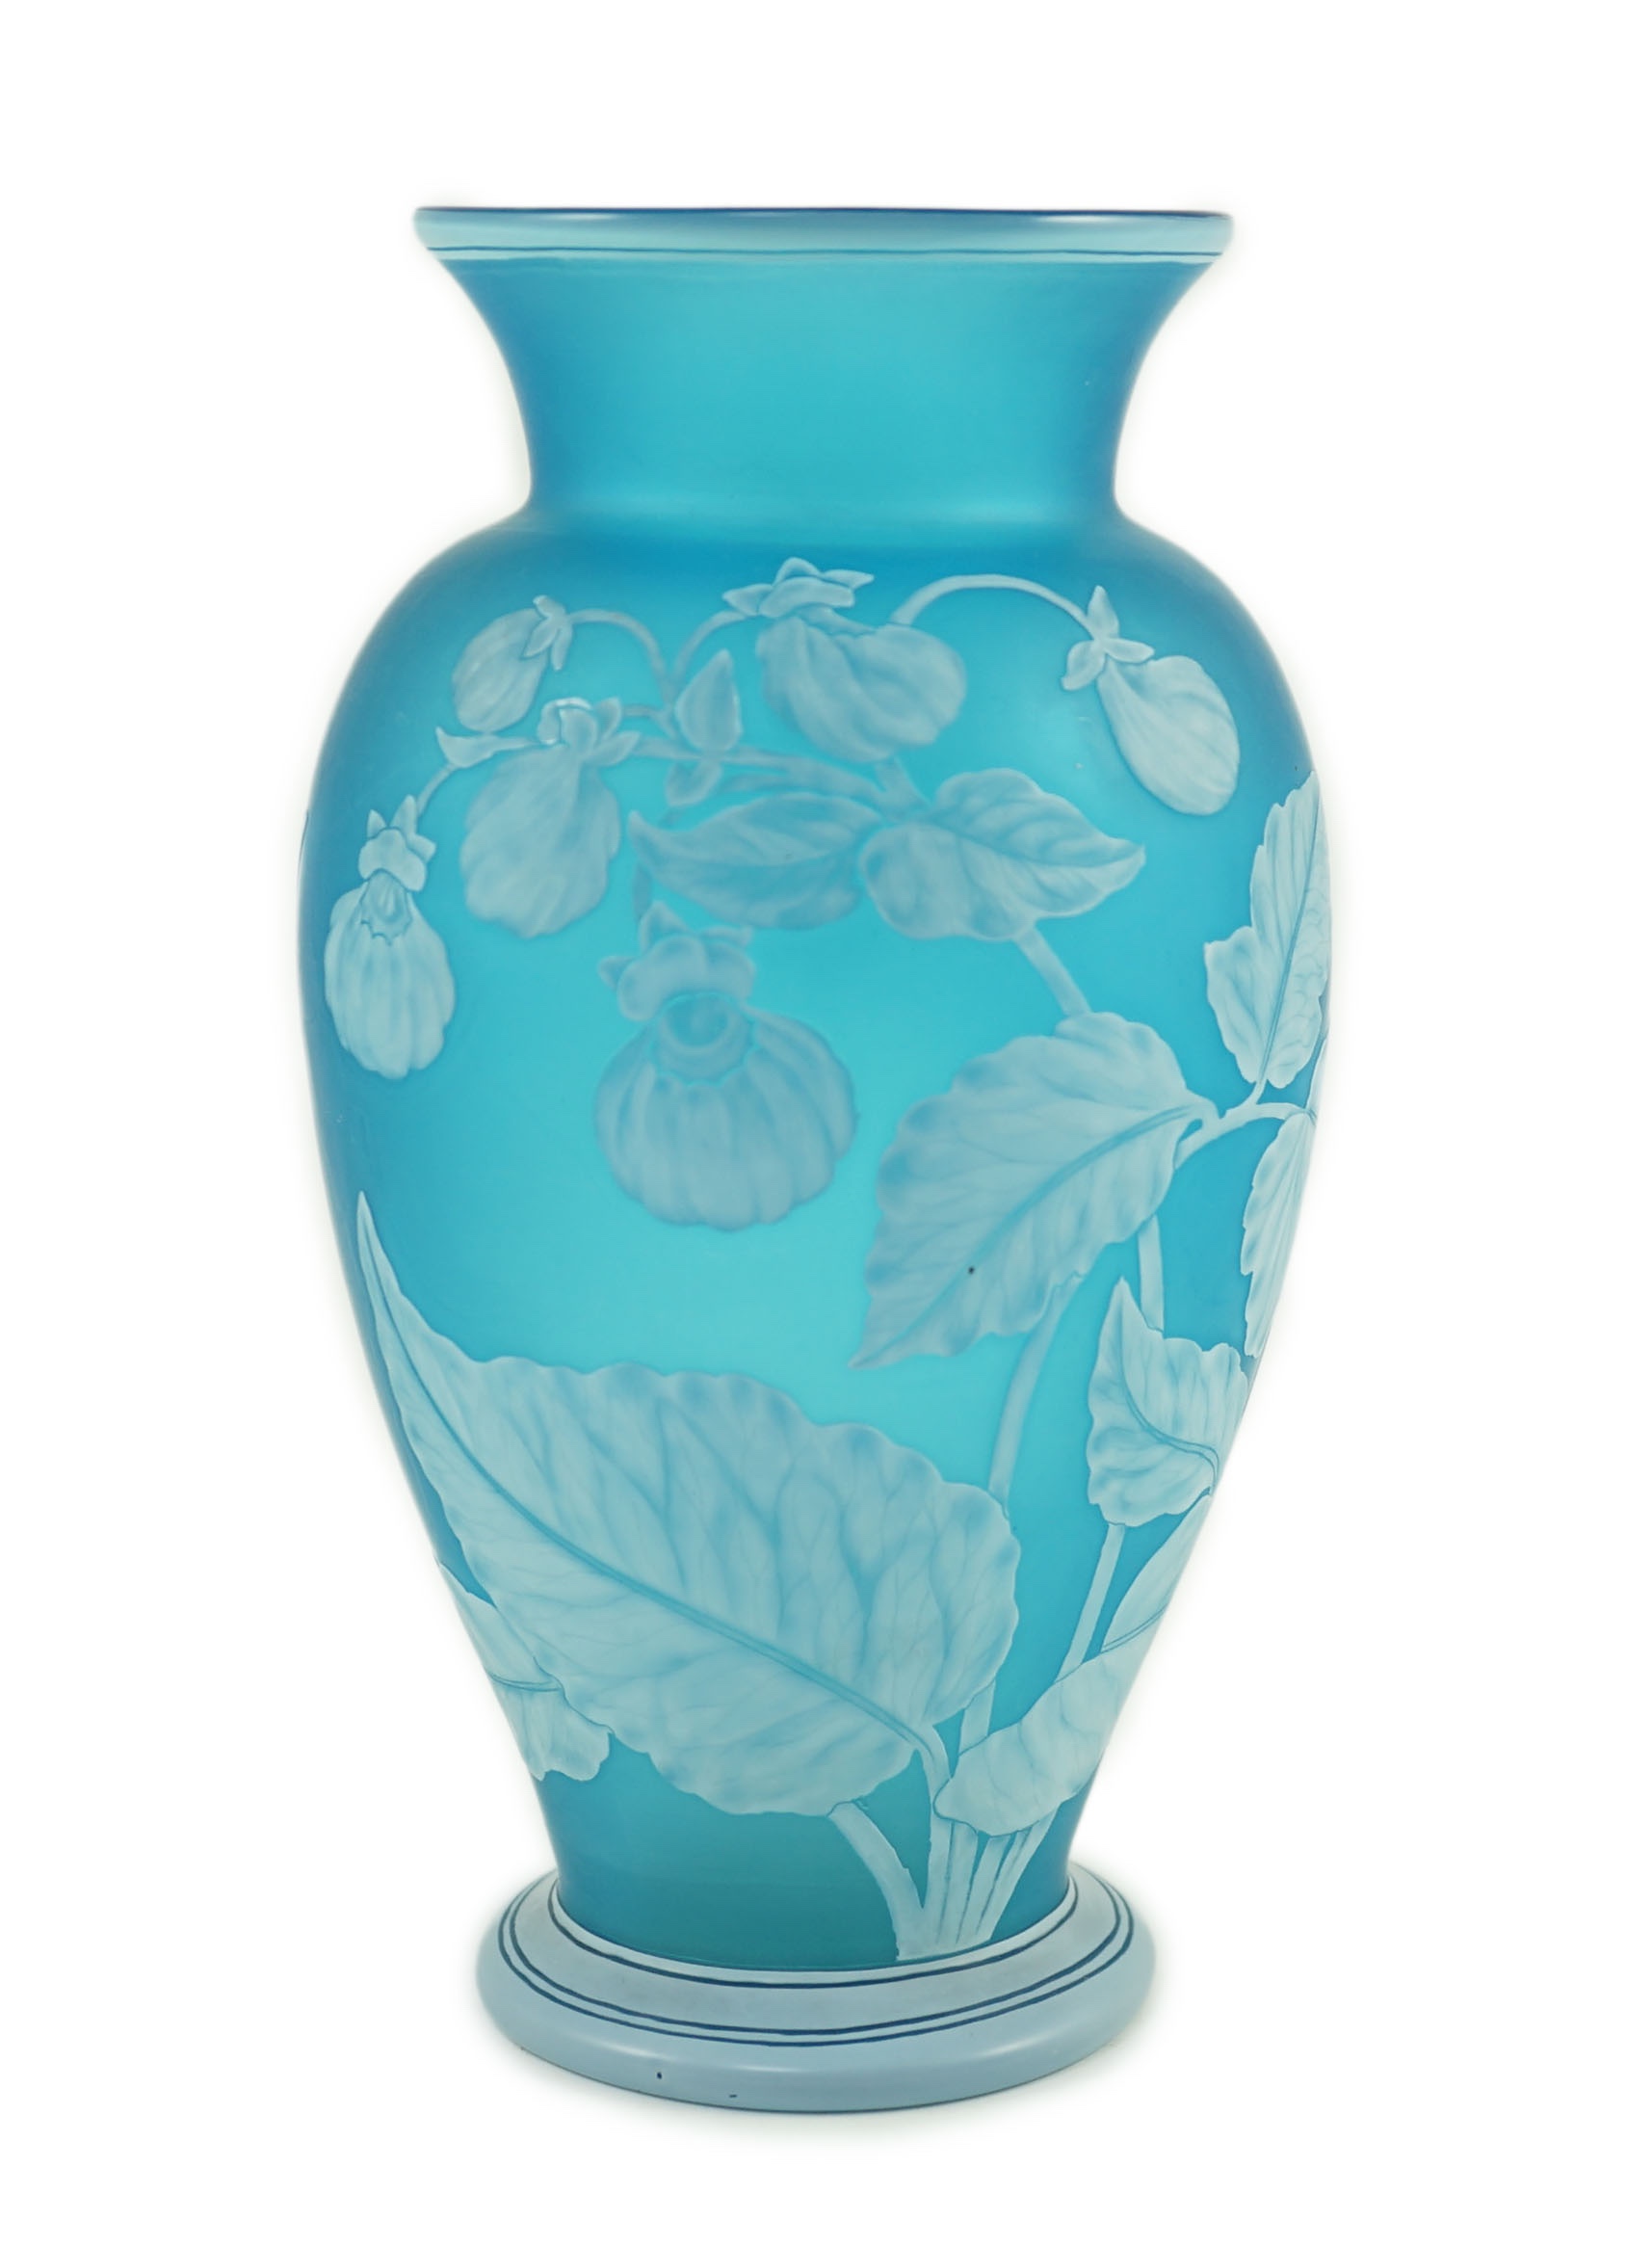 A Stevens and Williams cameo glass vase, late 19th century, 22cm high